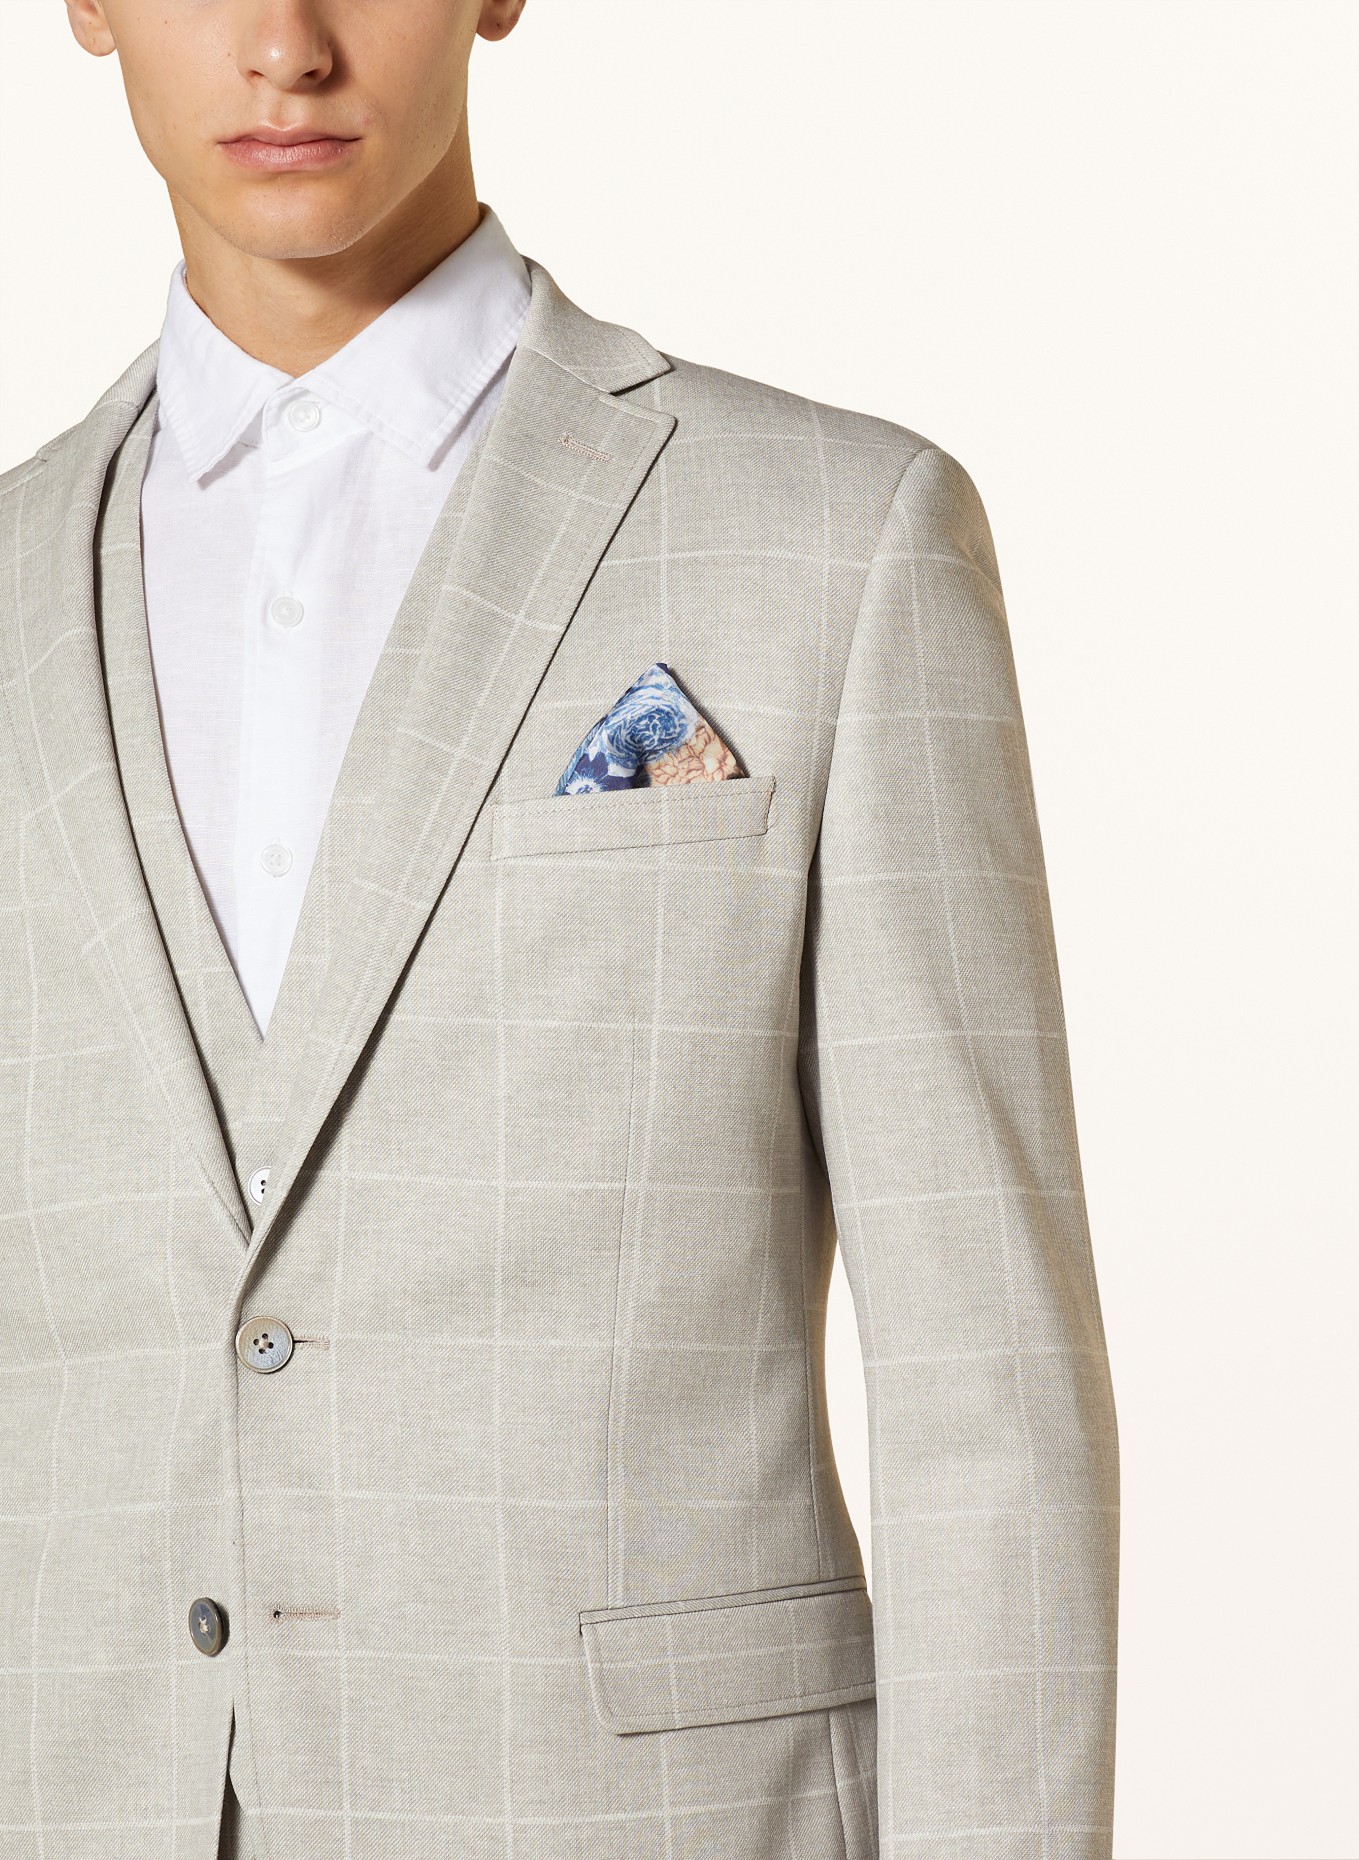 PAUL Suit jacket extra slim fit made of jersey, Color: 220 SAND (Image 5)